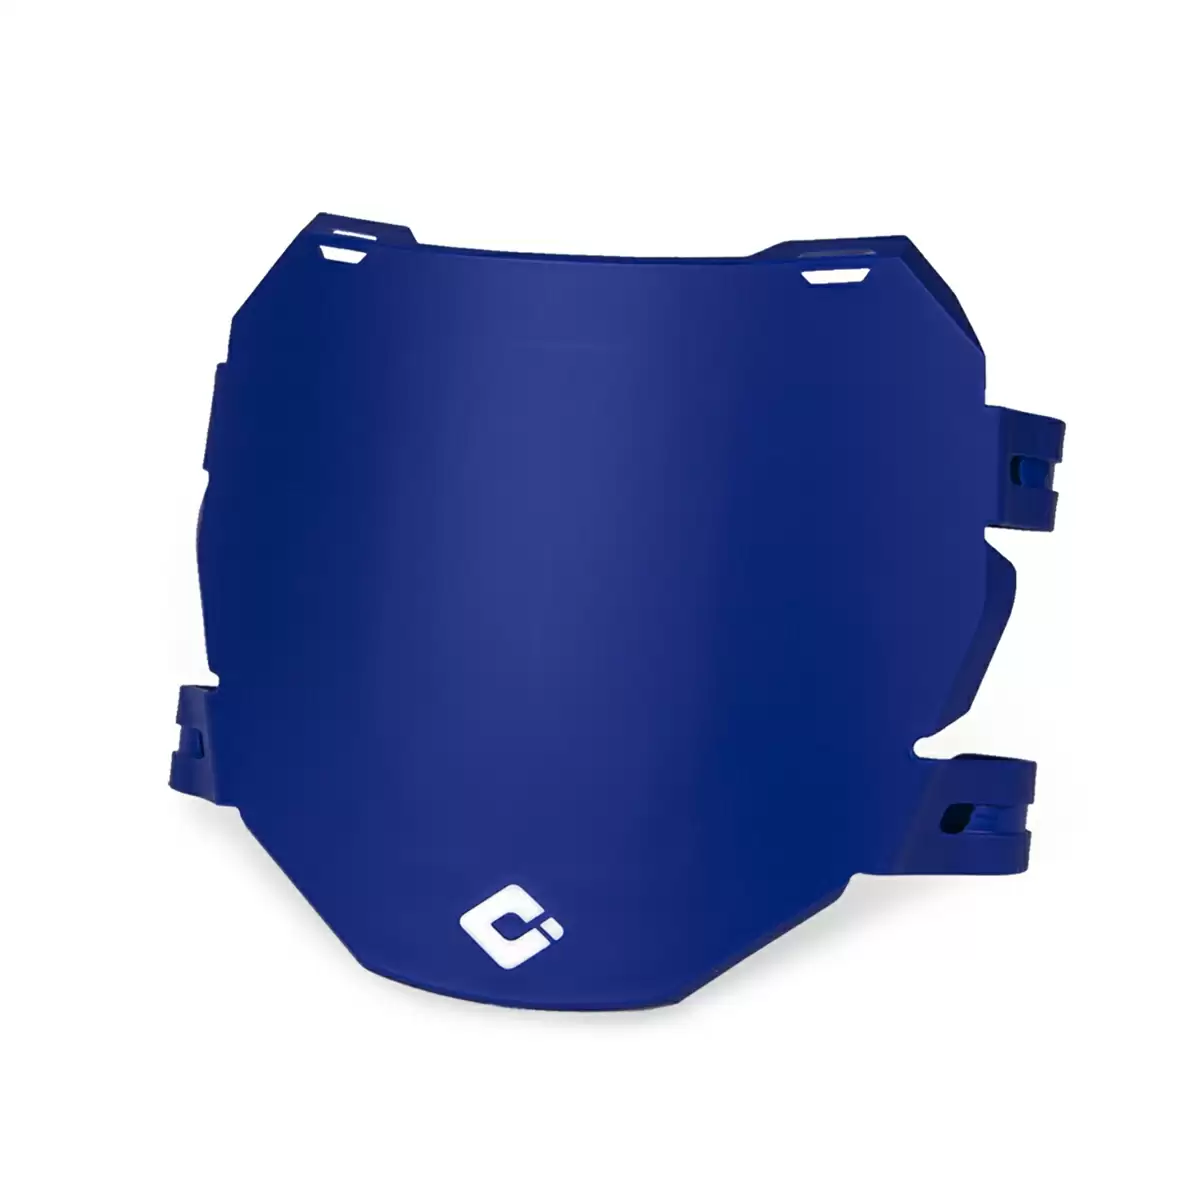 DH downhill number holder table blue - image